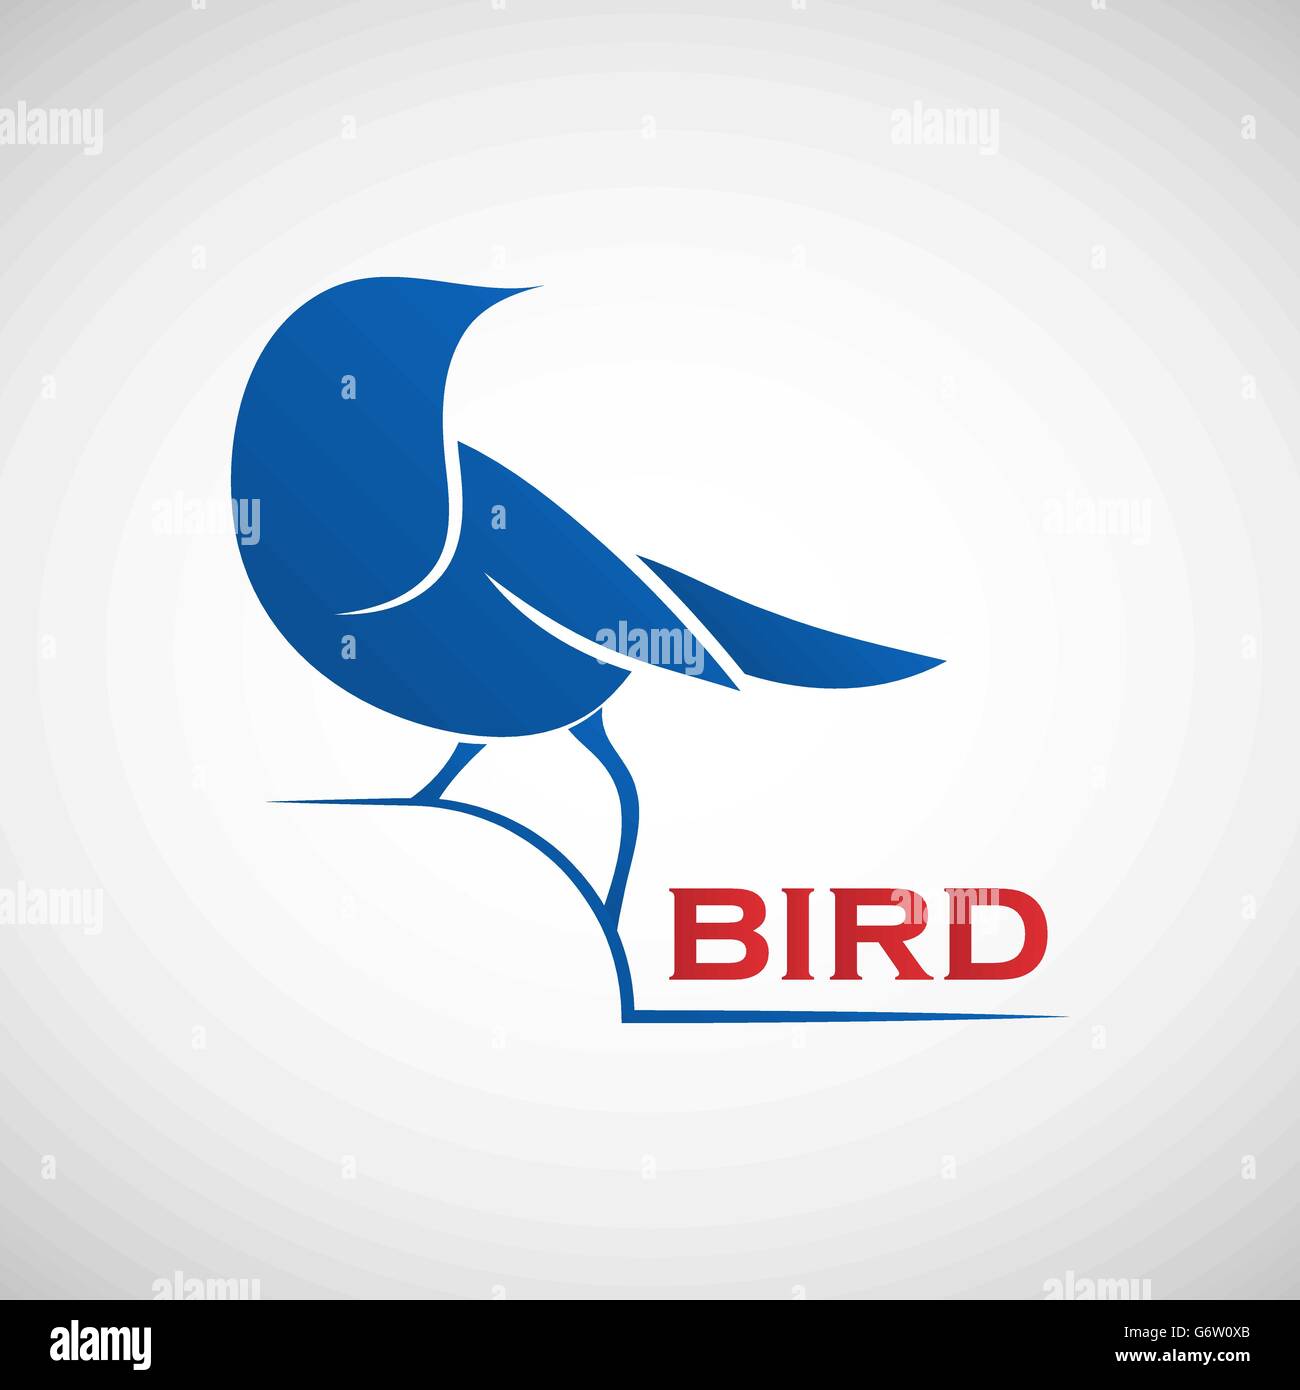 Abstract blue bird logo template. Vector illustration of sparrow as a symbol of creativity, joy, friendliness and community Stock Vector